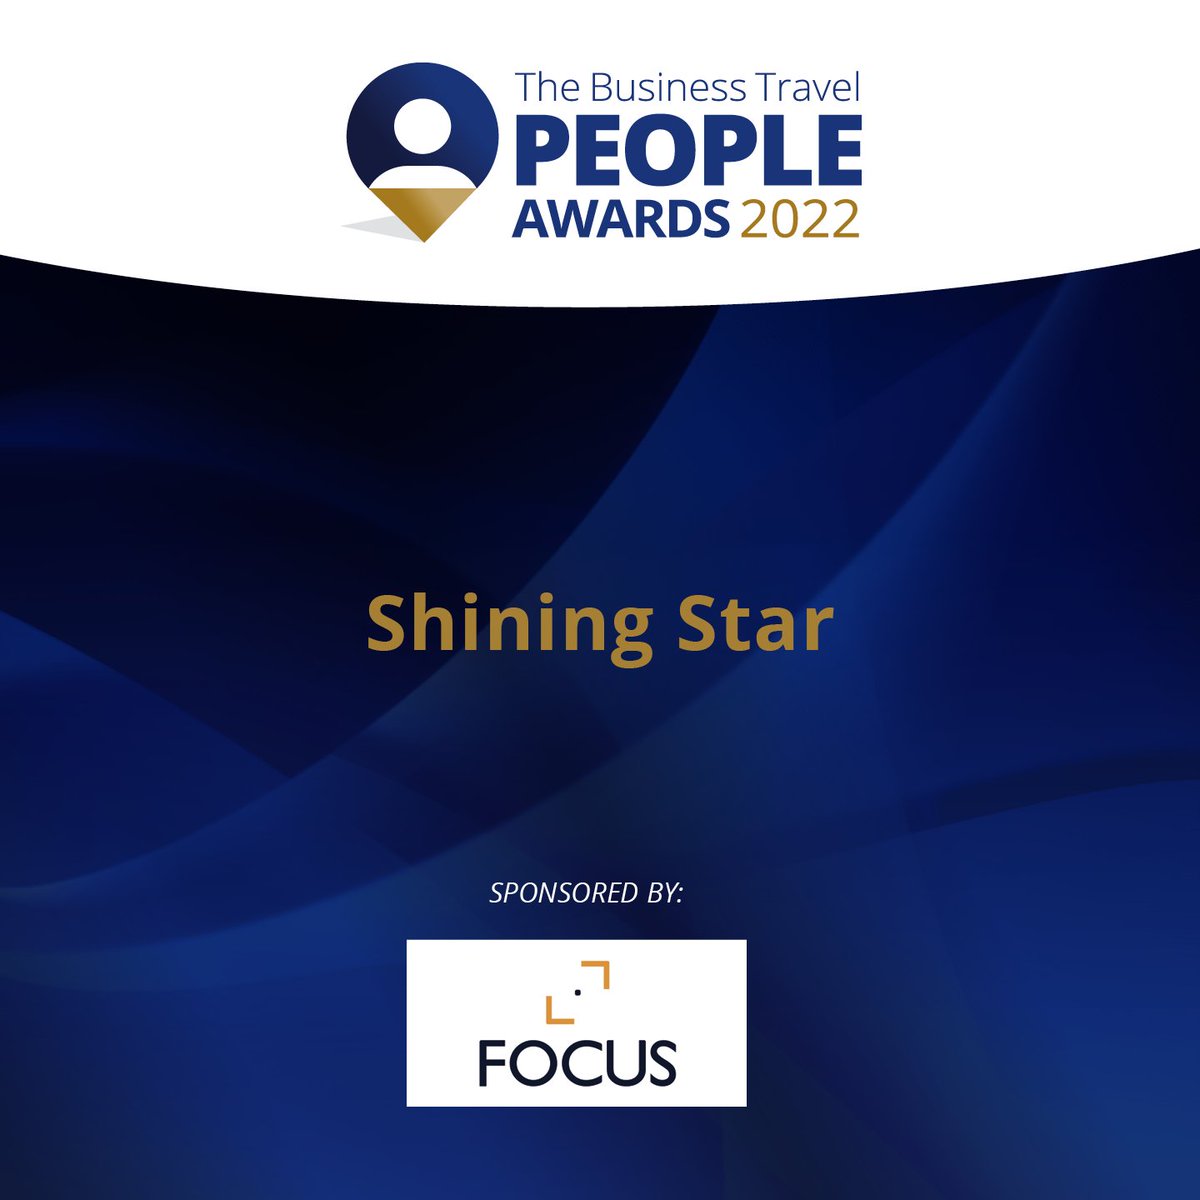 Our Shining Star award is kindly sponsored by Focus Travel Partnership #TBTPA2022 @FocusTravelP